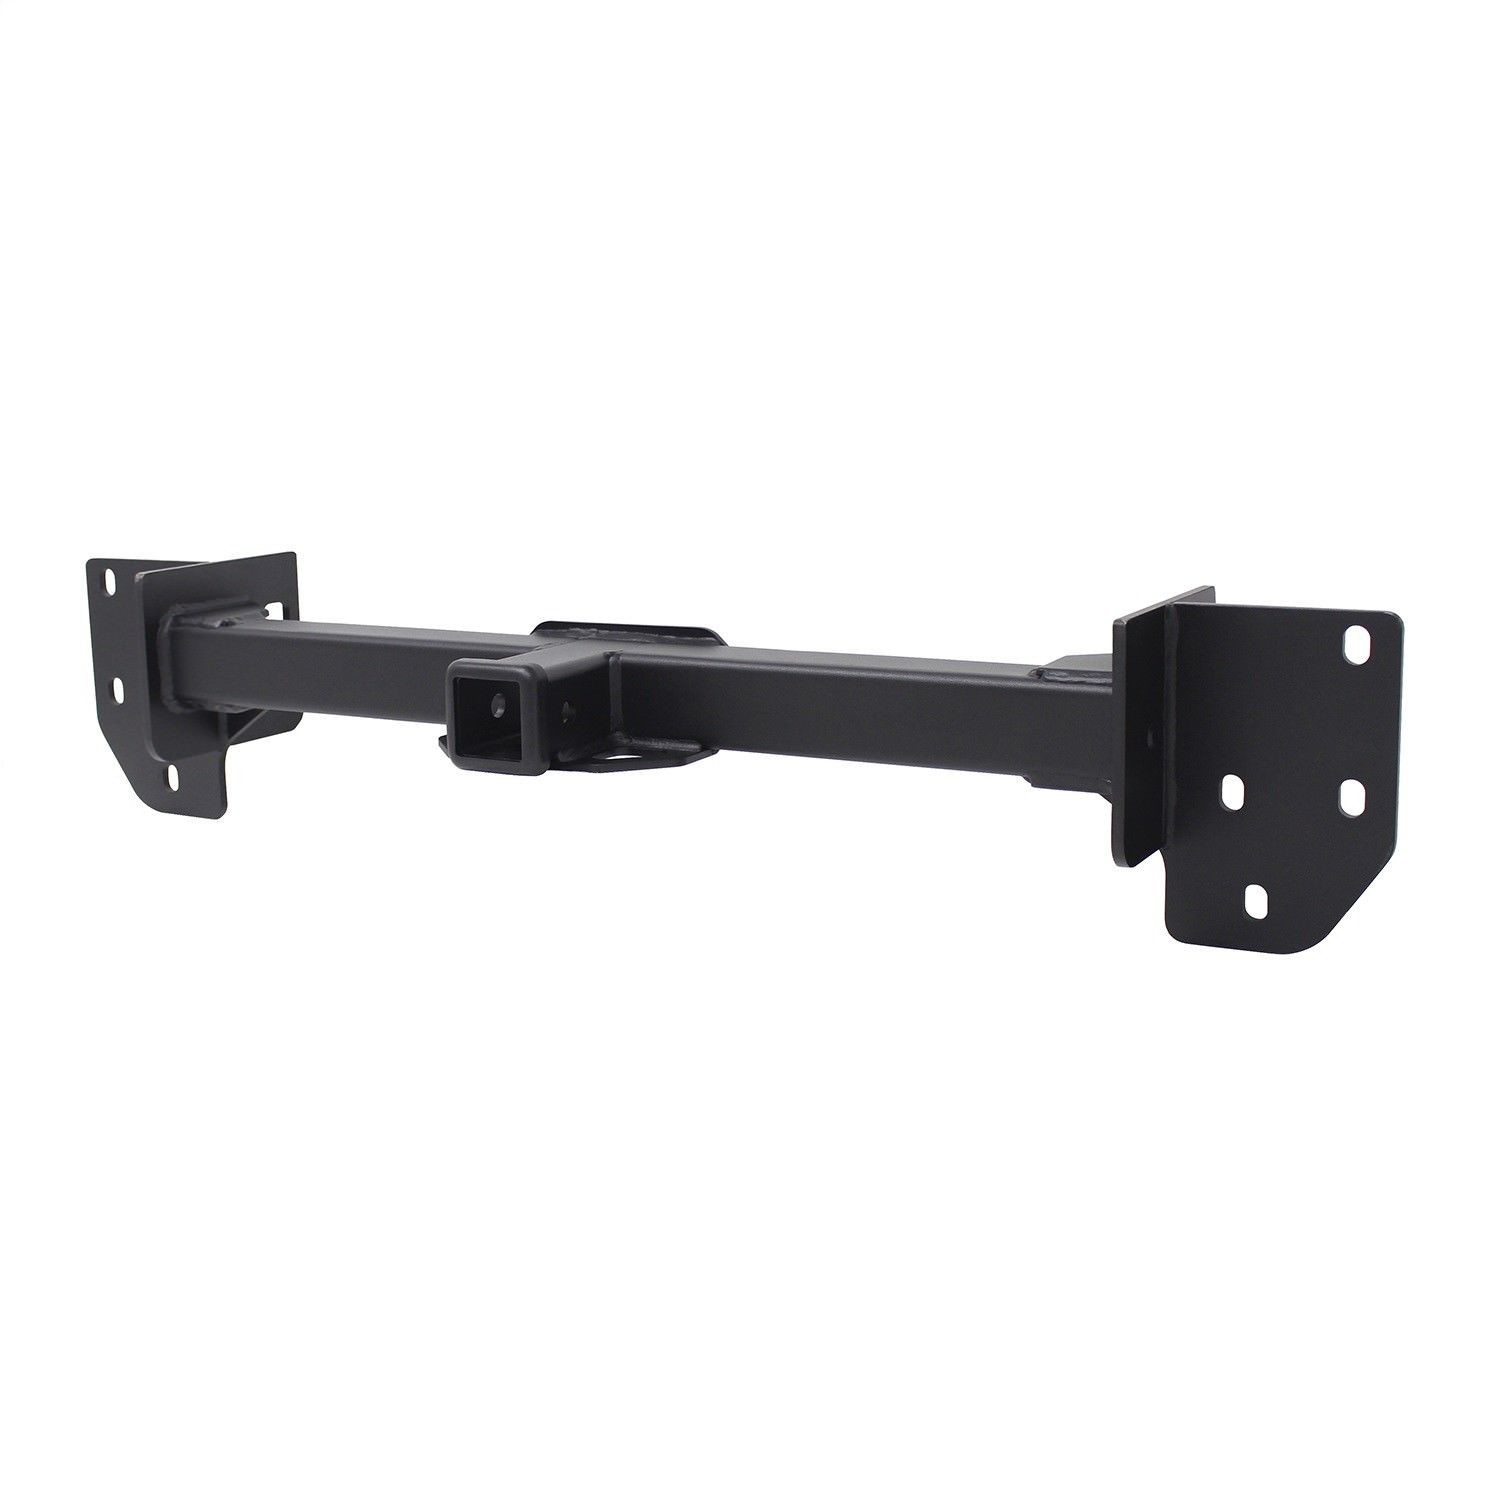 Ford F-150 Drop Hitch For Truck , Adjustable Receiver Hitches For Trucks